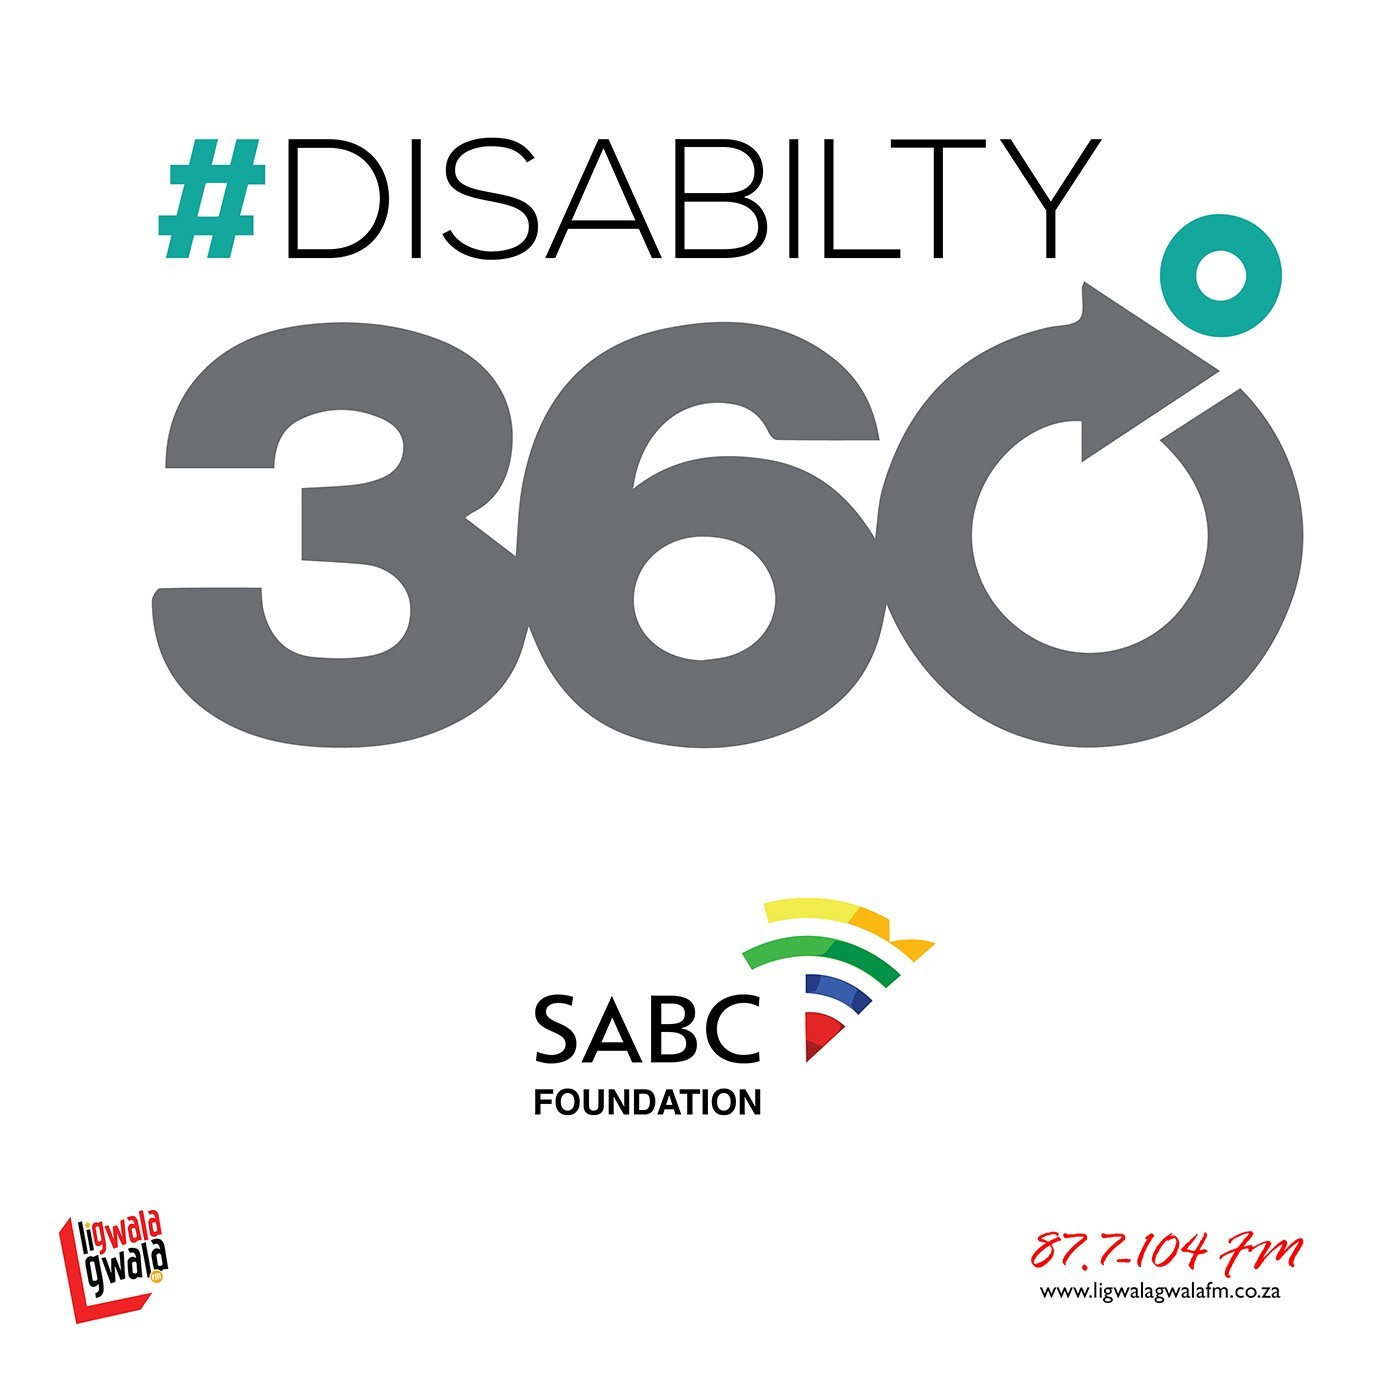 #Disability360 - Mr Dutoit Nkambule from Department of Social Development - Disability Rights Awareness Month